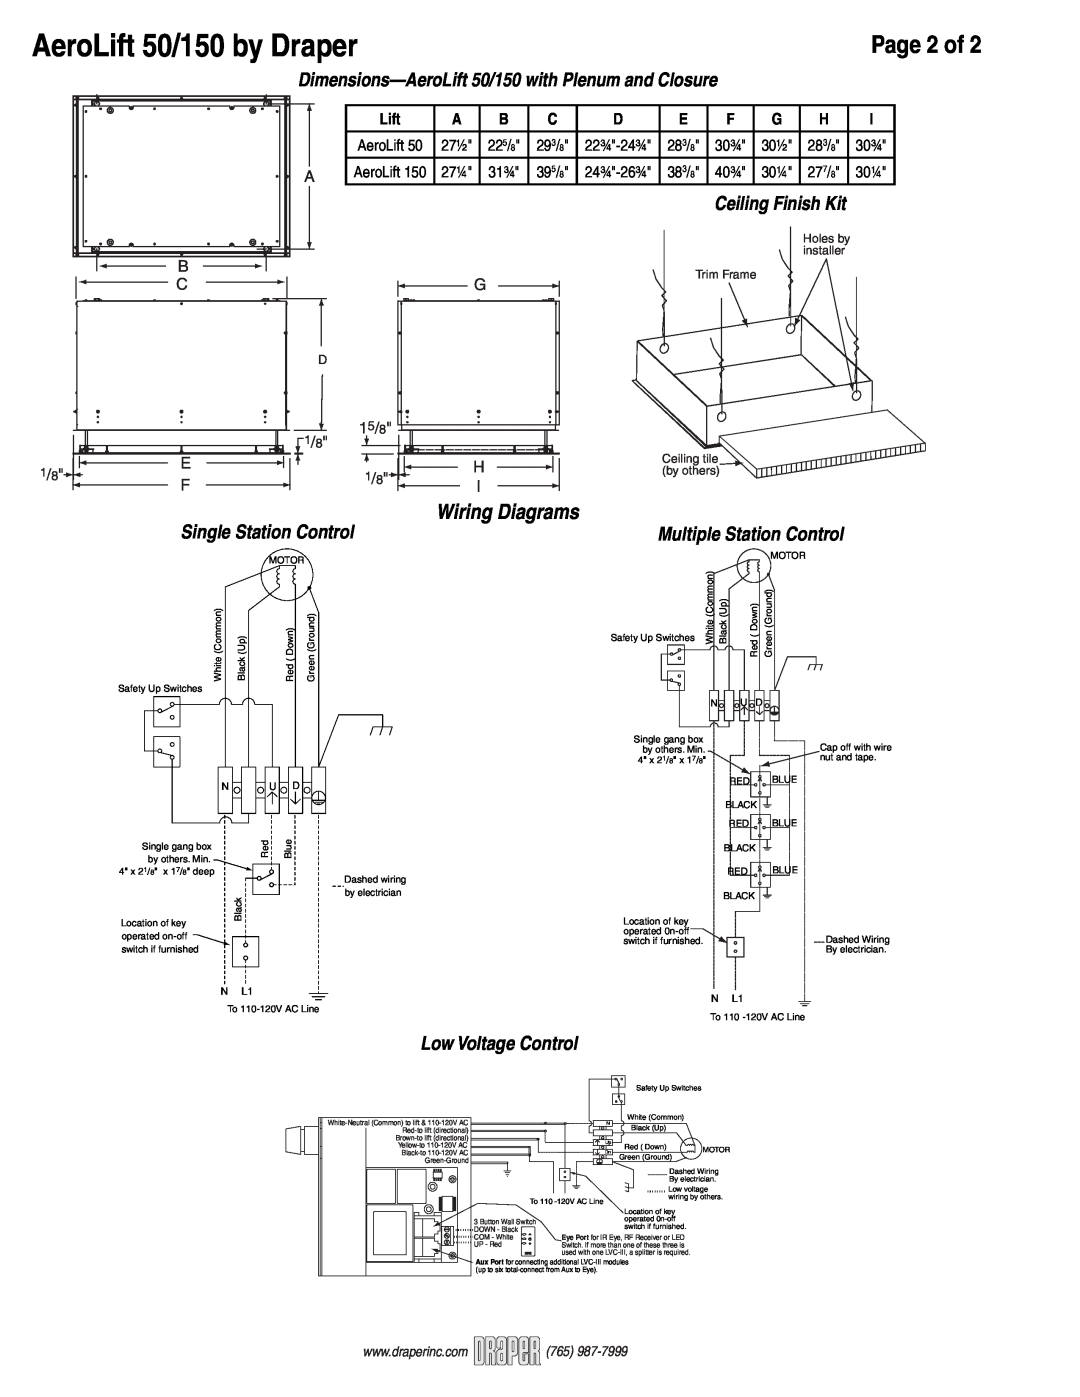 Draper Dimensions-AeroLift50/150 with Plenum and Closure, Ceiling Finish Kit, Single Station Control, Page 2 of, G 15/8 